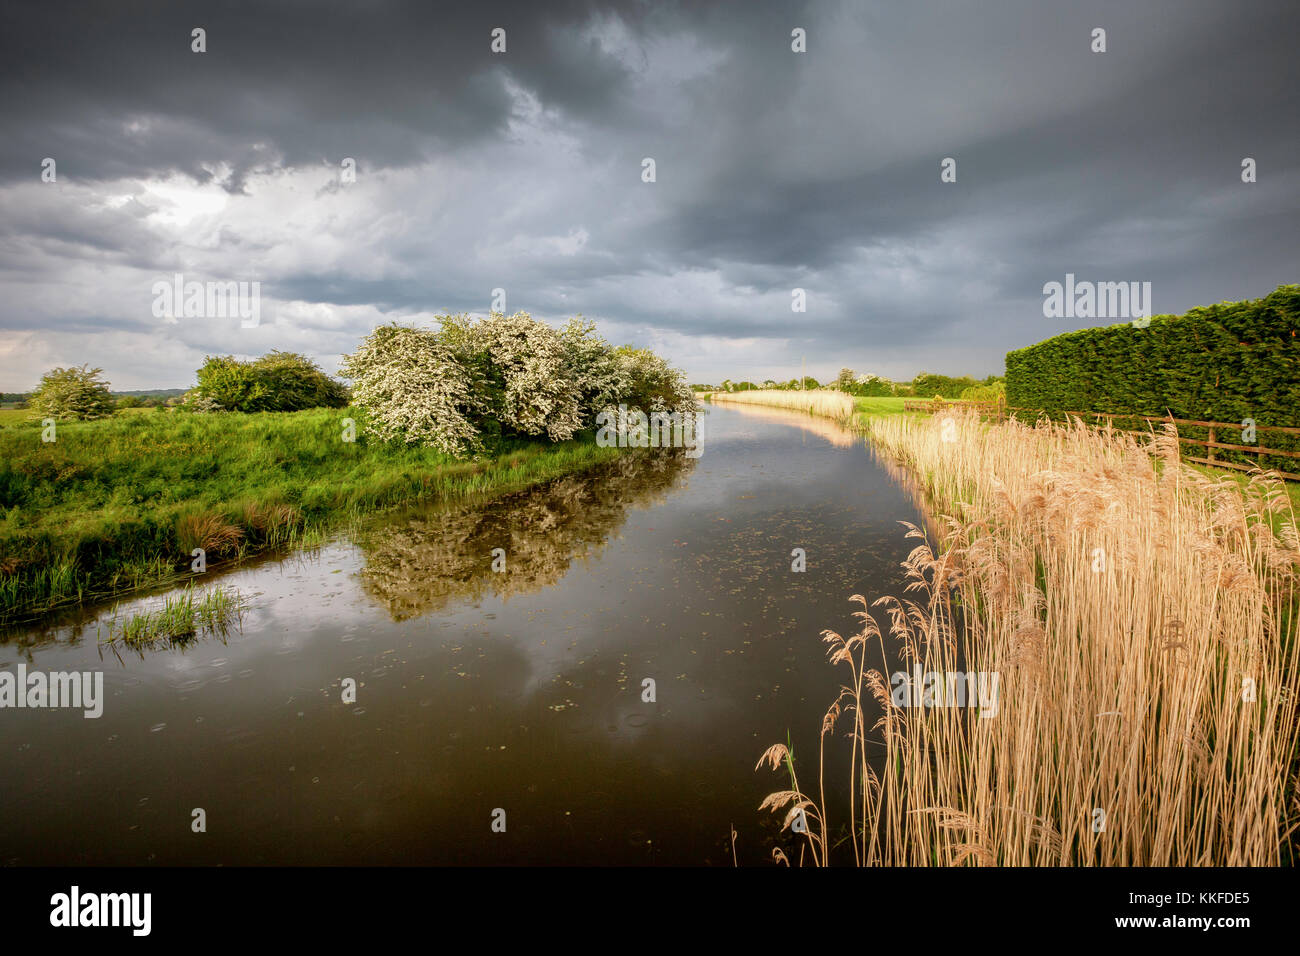 Dramatic storm light during the afternoon over the Royal Military Canal at Warehorne on the Romney Marsh, Kent, UK. Stock Photo